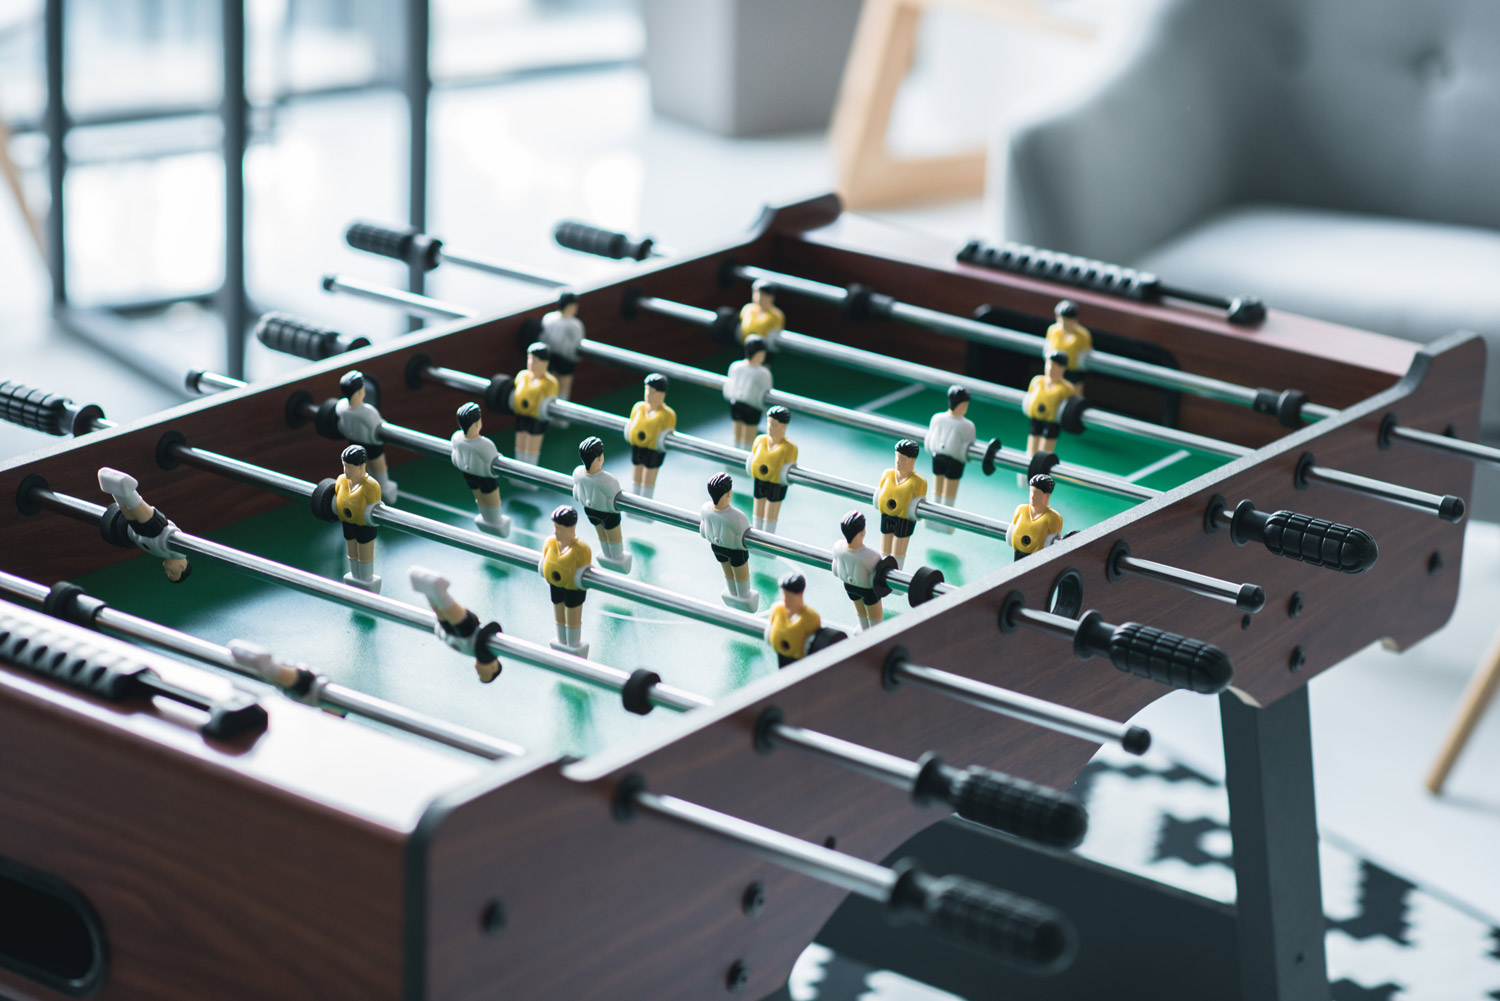 foosball table with yellow and white jersey players